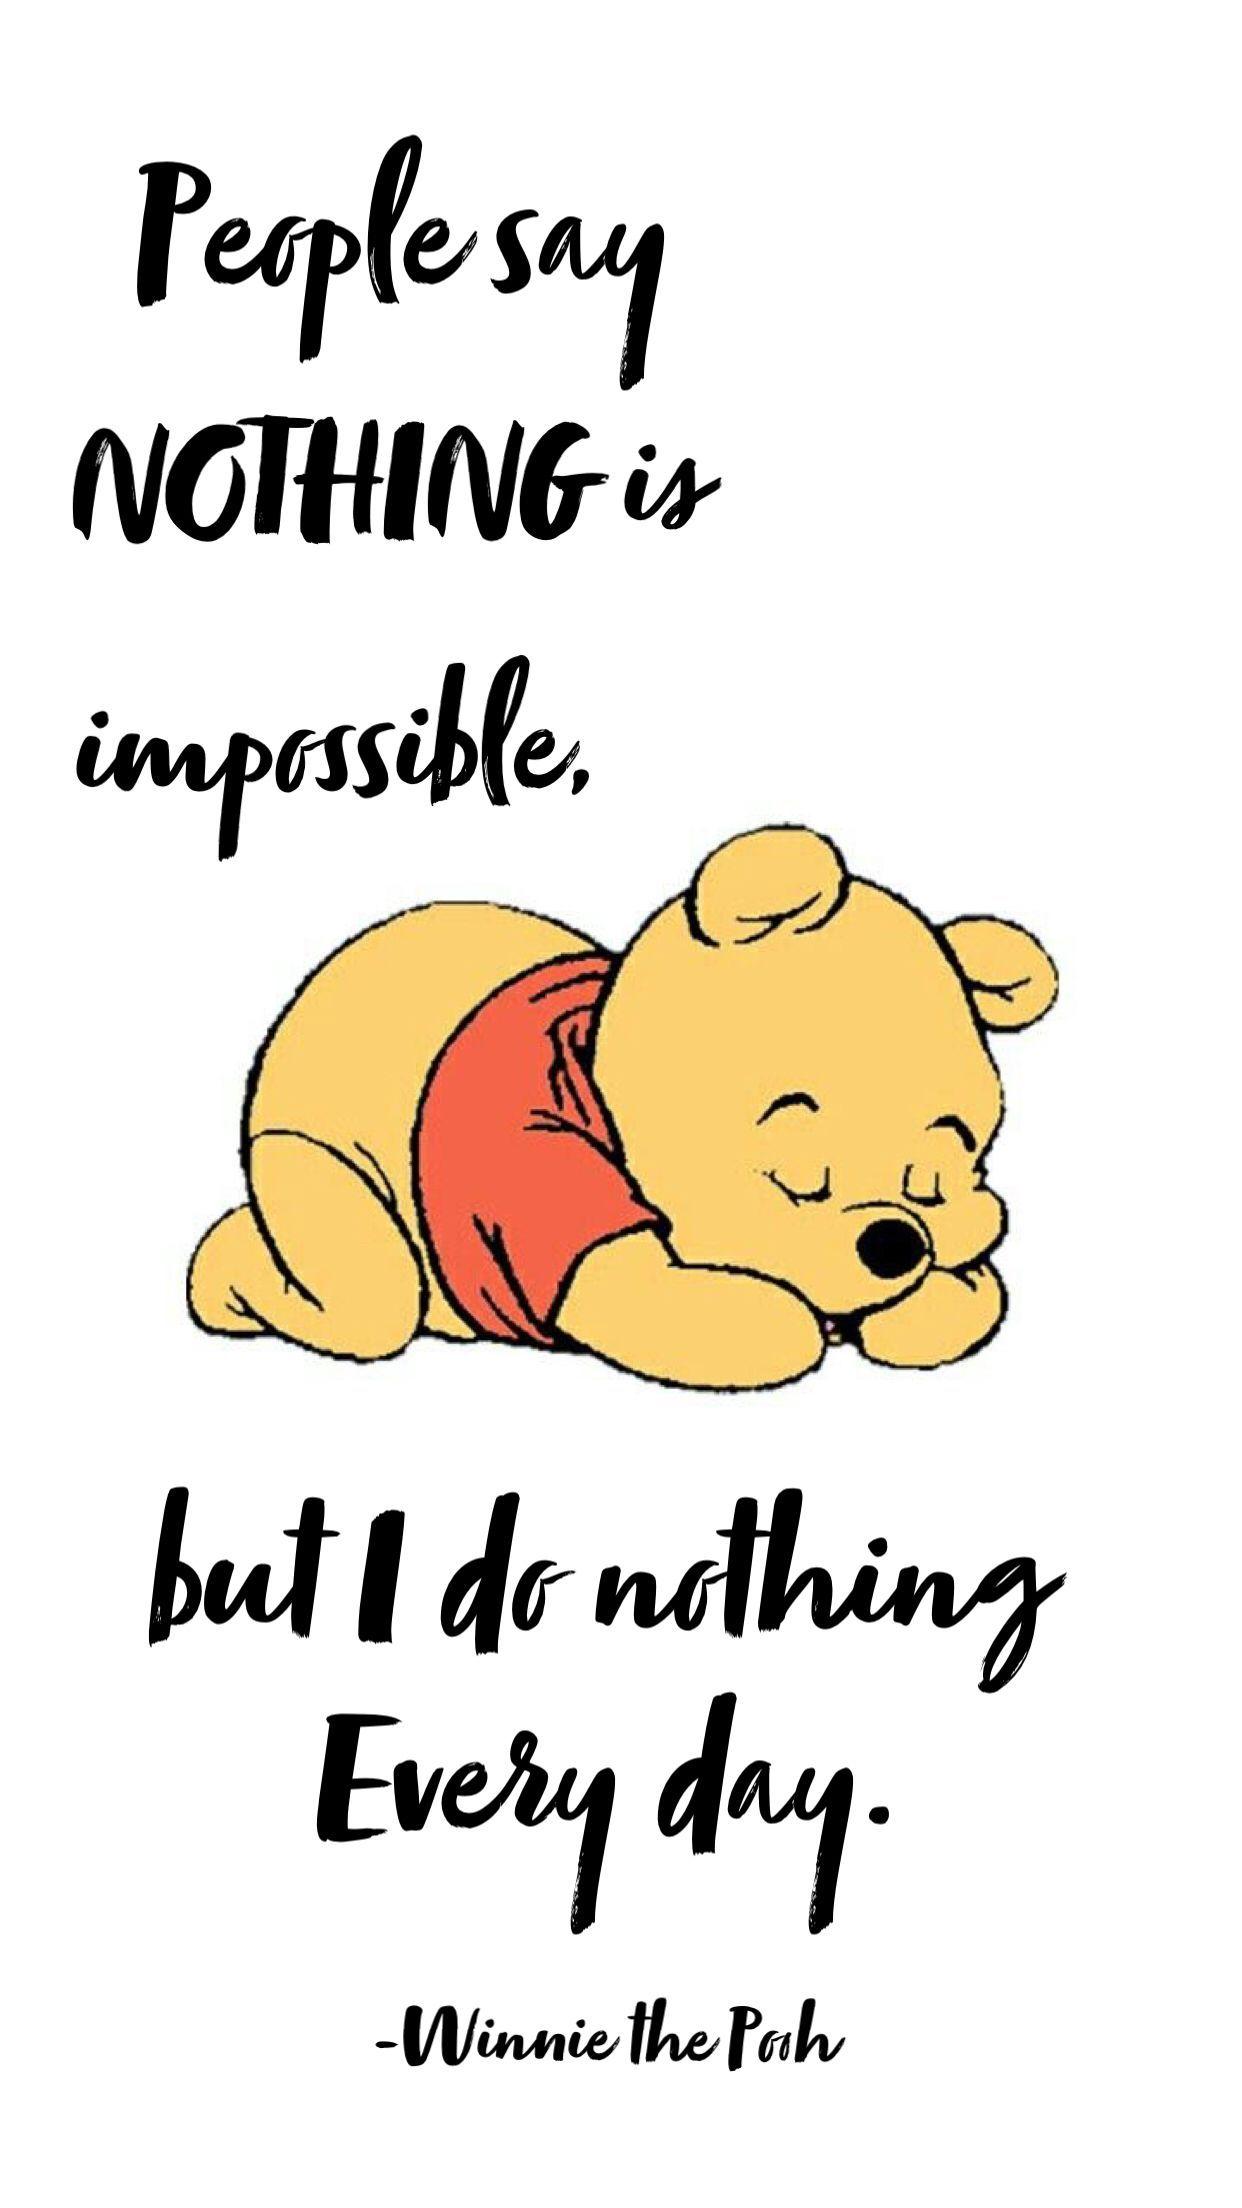 Winnie the Pooh Quotes Wallpapers Top Free Winnie the Pooh Quotes